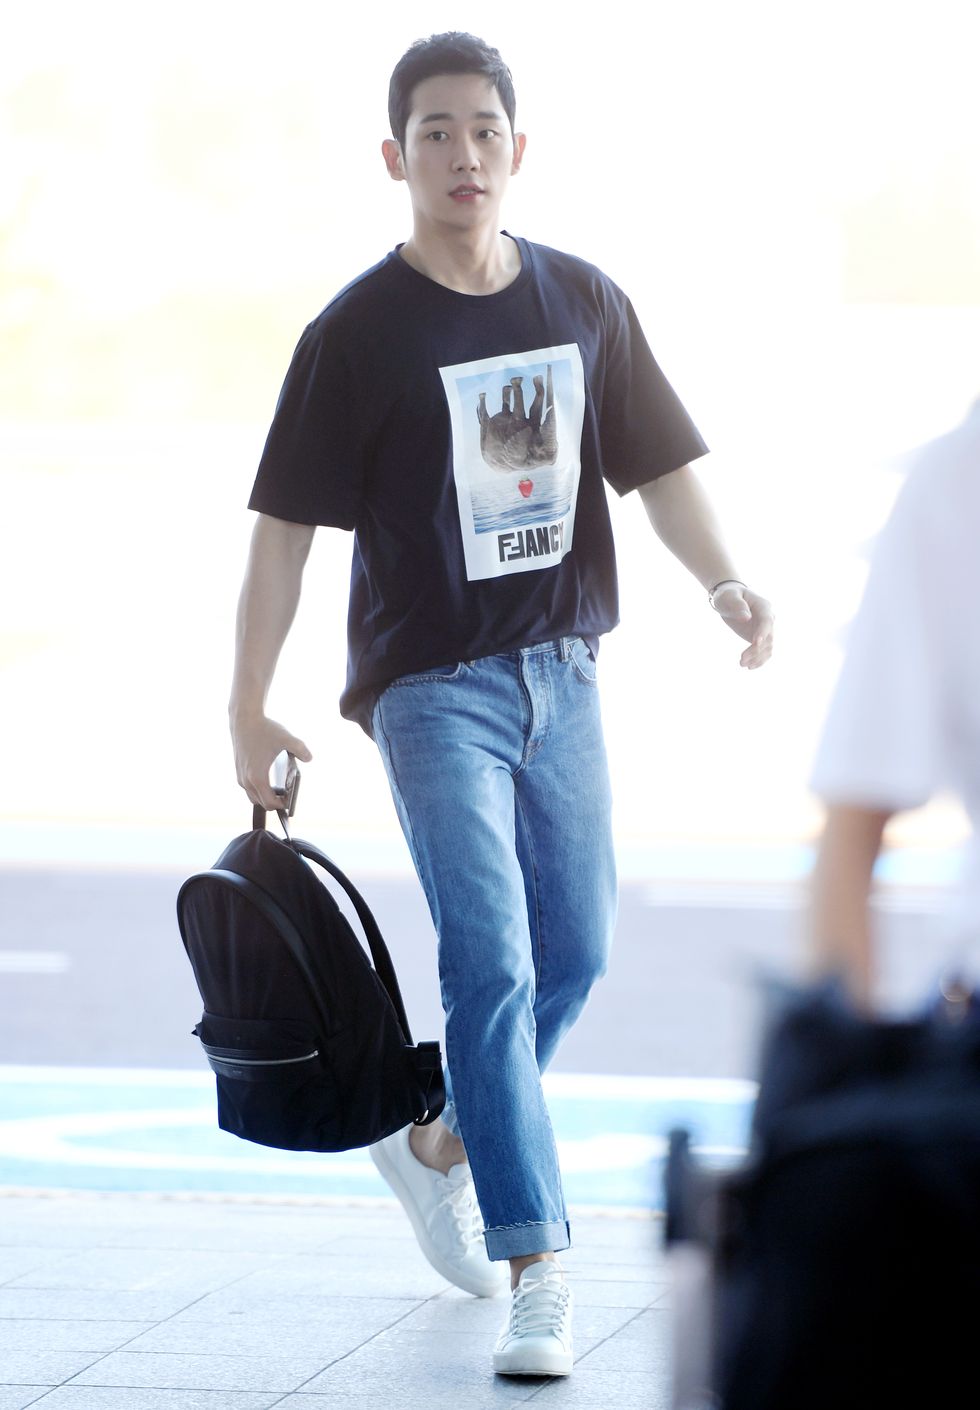 jung hae in poses for pictures after he arrived at incheon international airport on june 1st in incheon, south korea photoosen